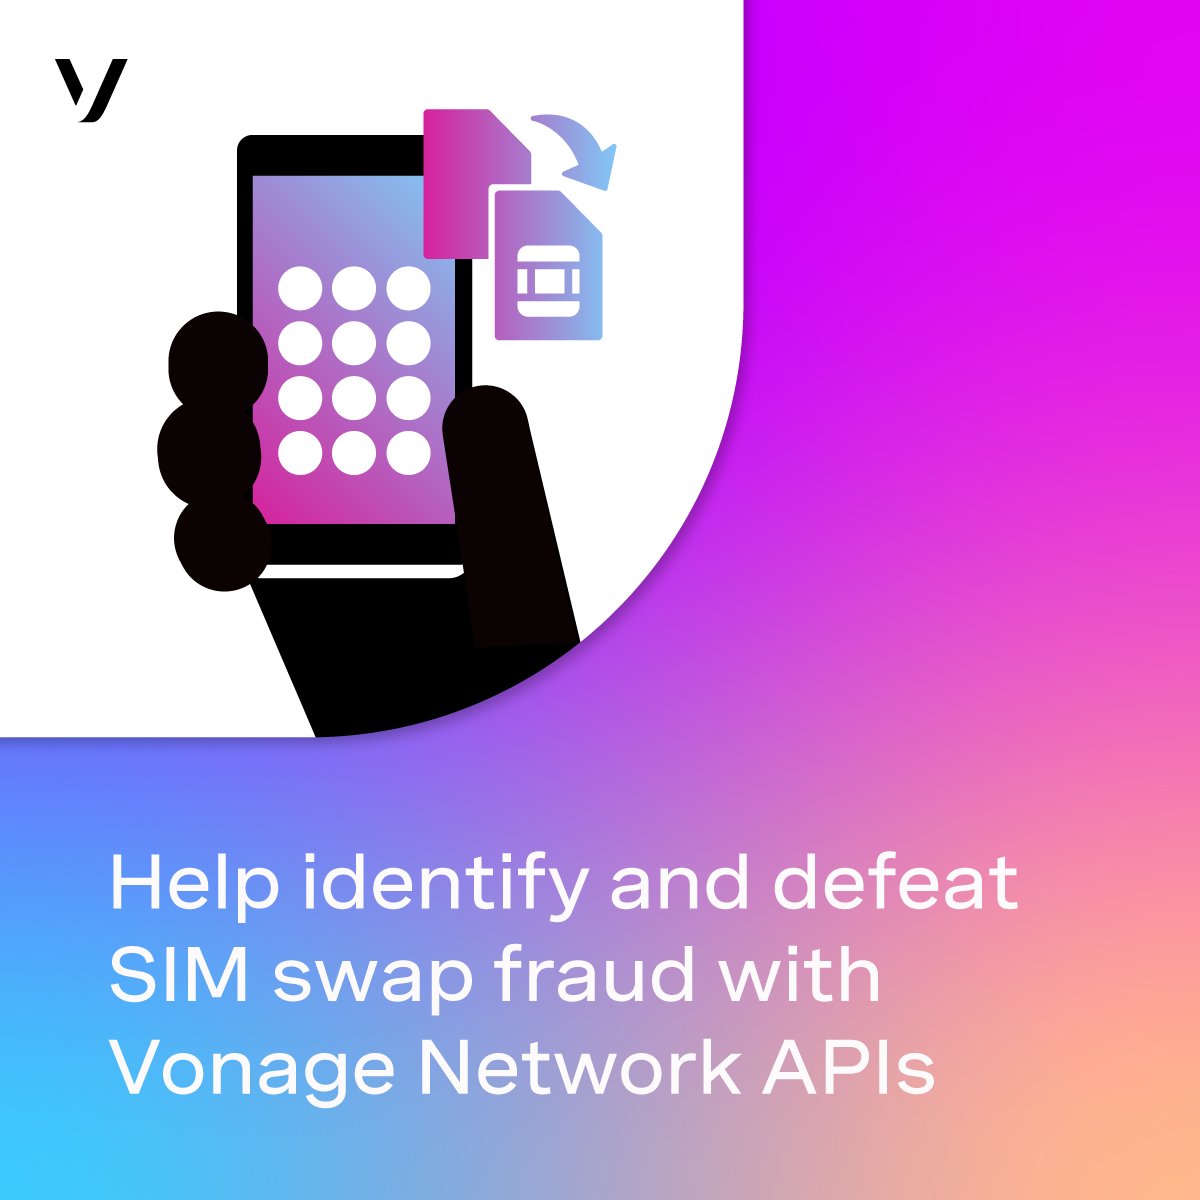 How’s this for nefarious: Bad guys can “silently” swap SIM cards, access protected accounts and … well, you don’t want to know. bit.ly/4e1abyA #CPaaS #APIs